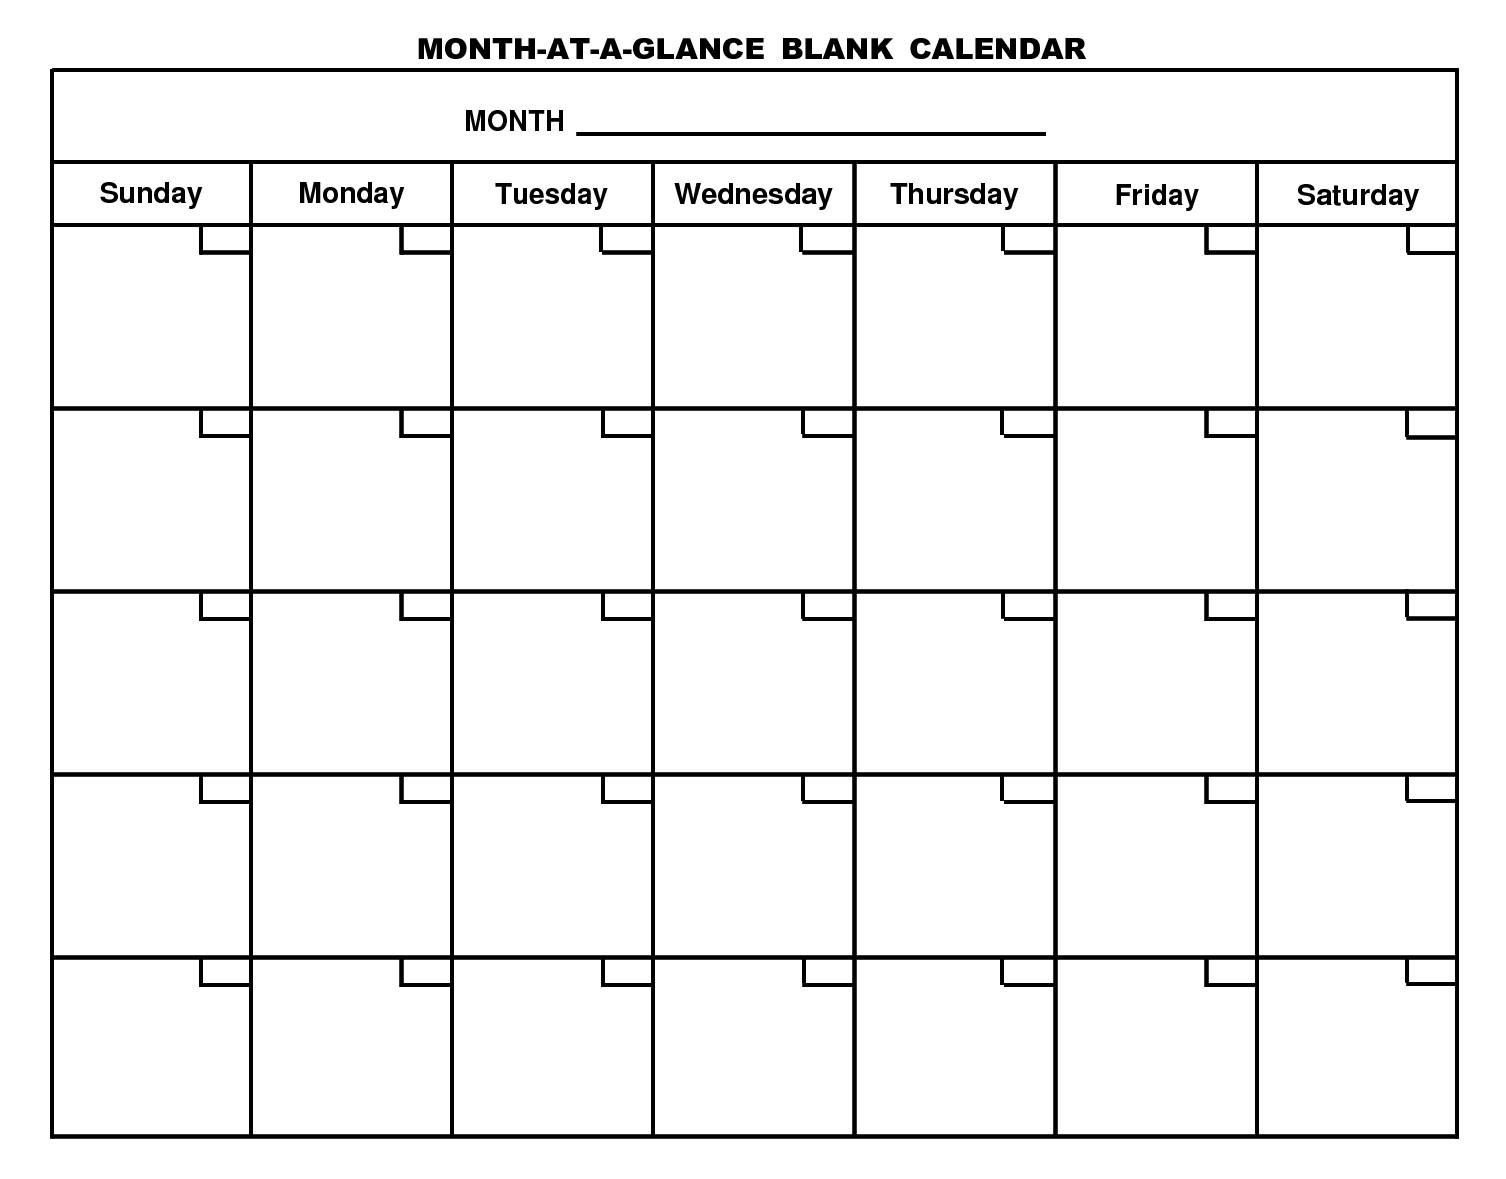 Month At A Glance Blank Calendar | Monthly Printable Calender Month At A Glance Blank Calendar